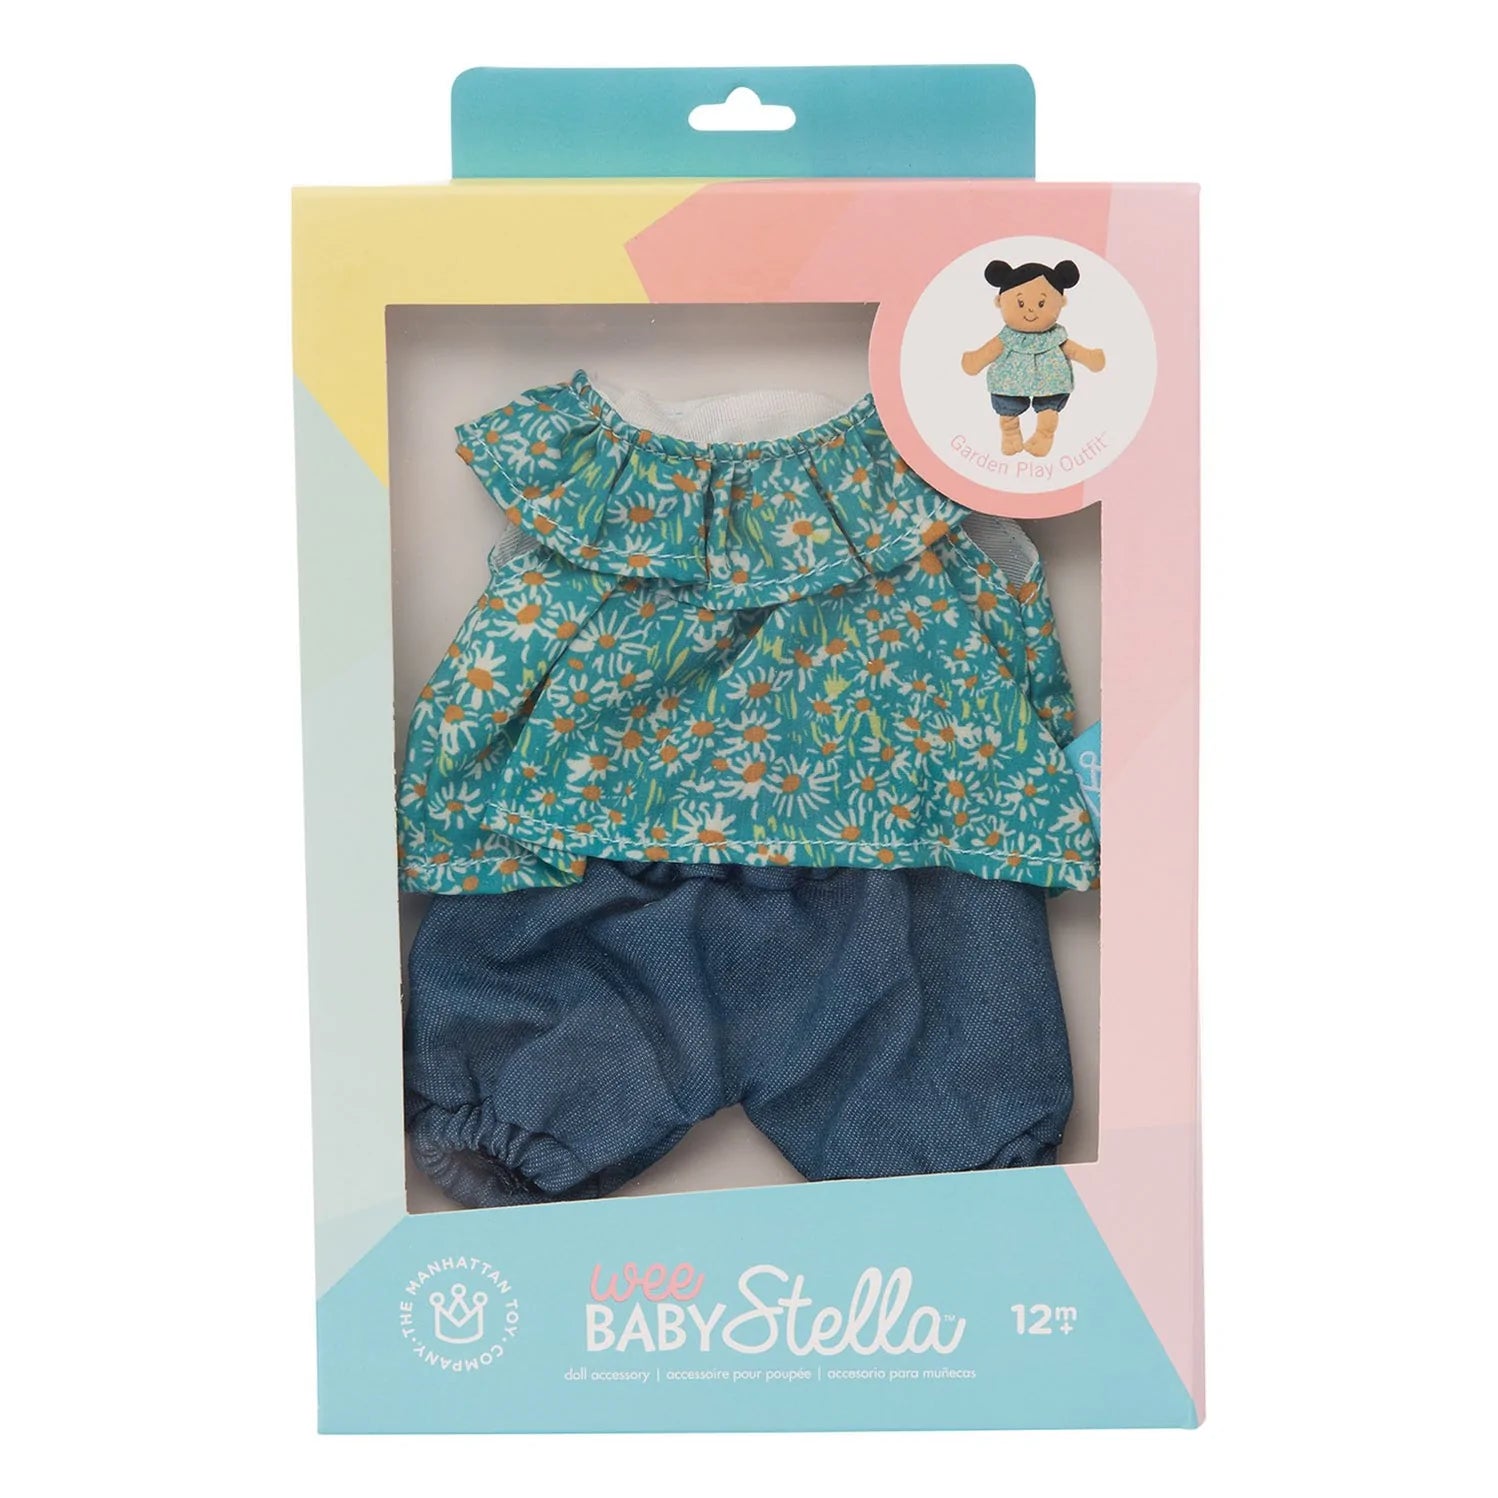 Wee Baby Stella Doll Garden Play Outfit